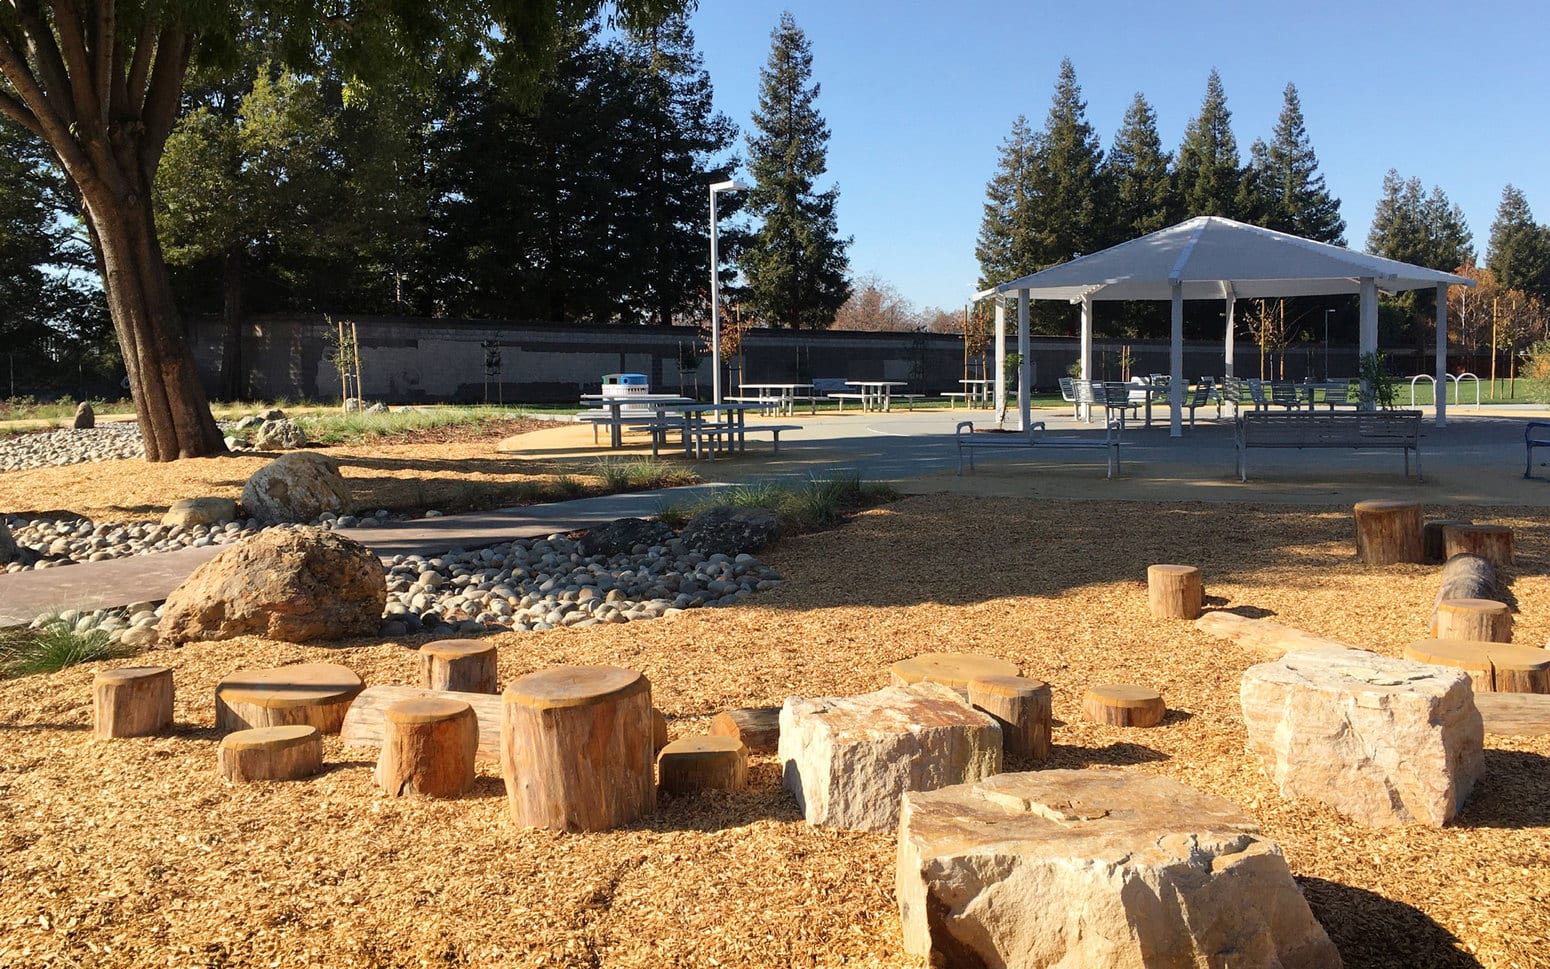 Picnic area with wood and rock stepping stones in mulched area